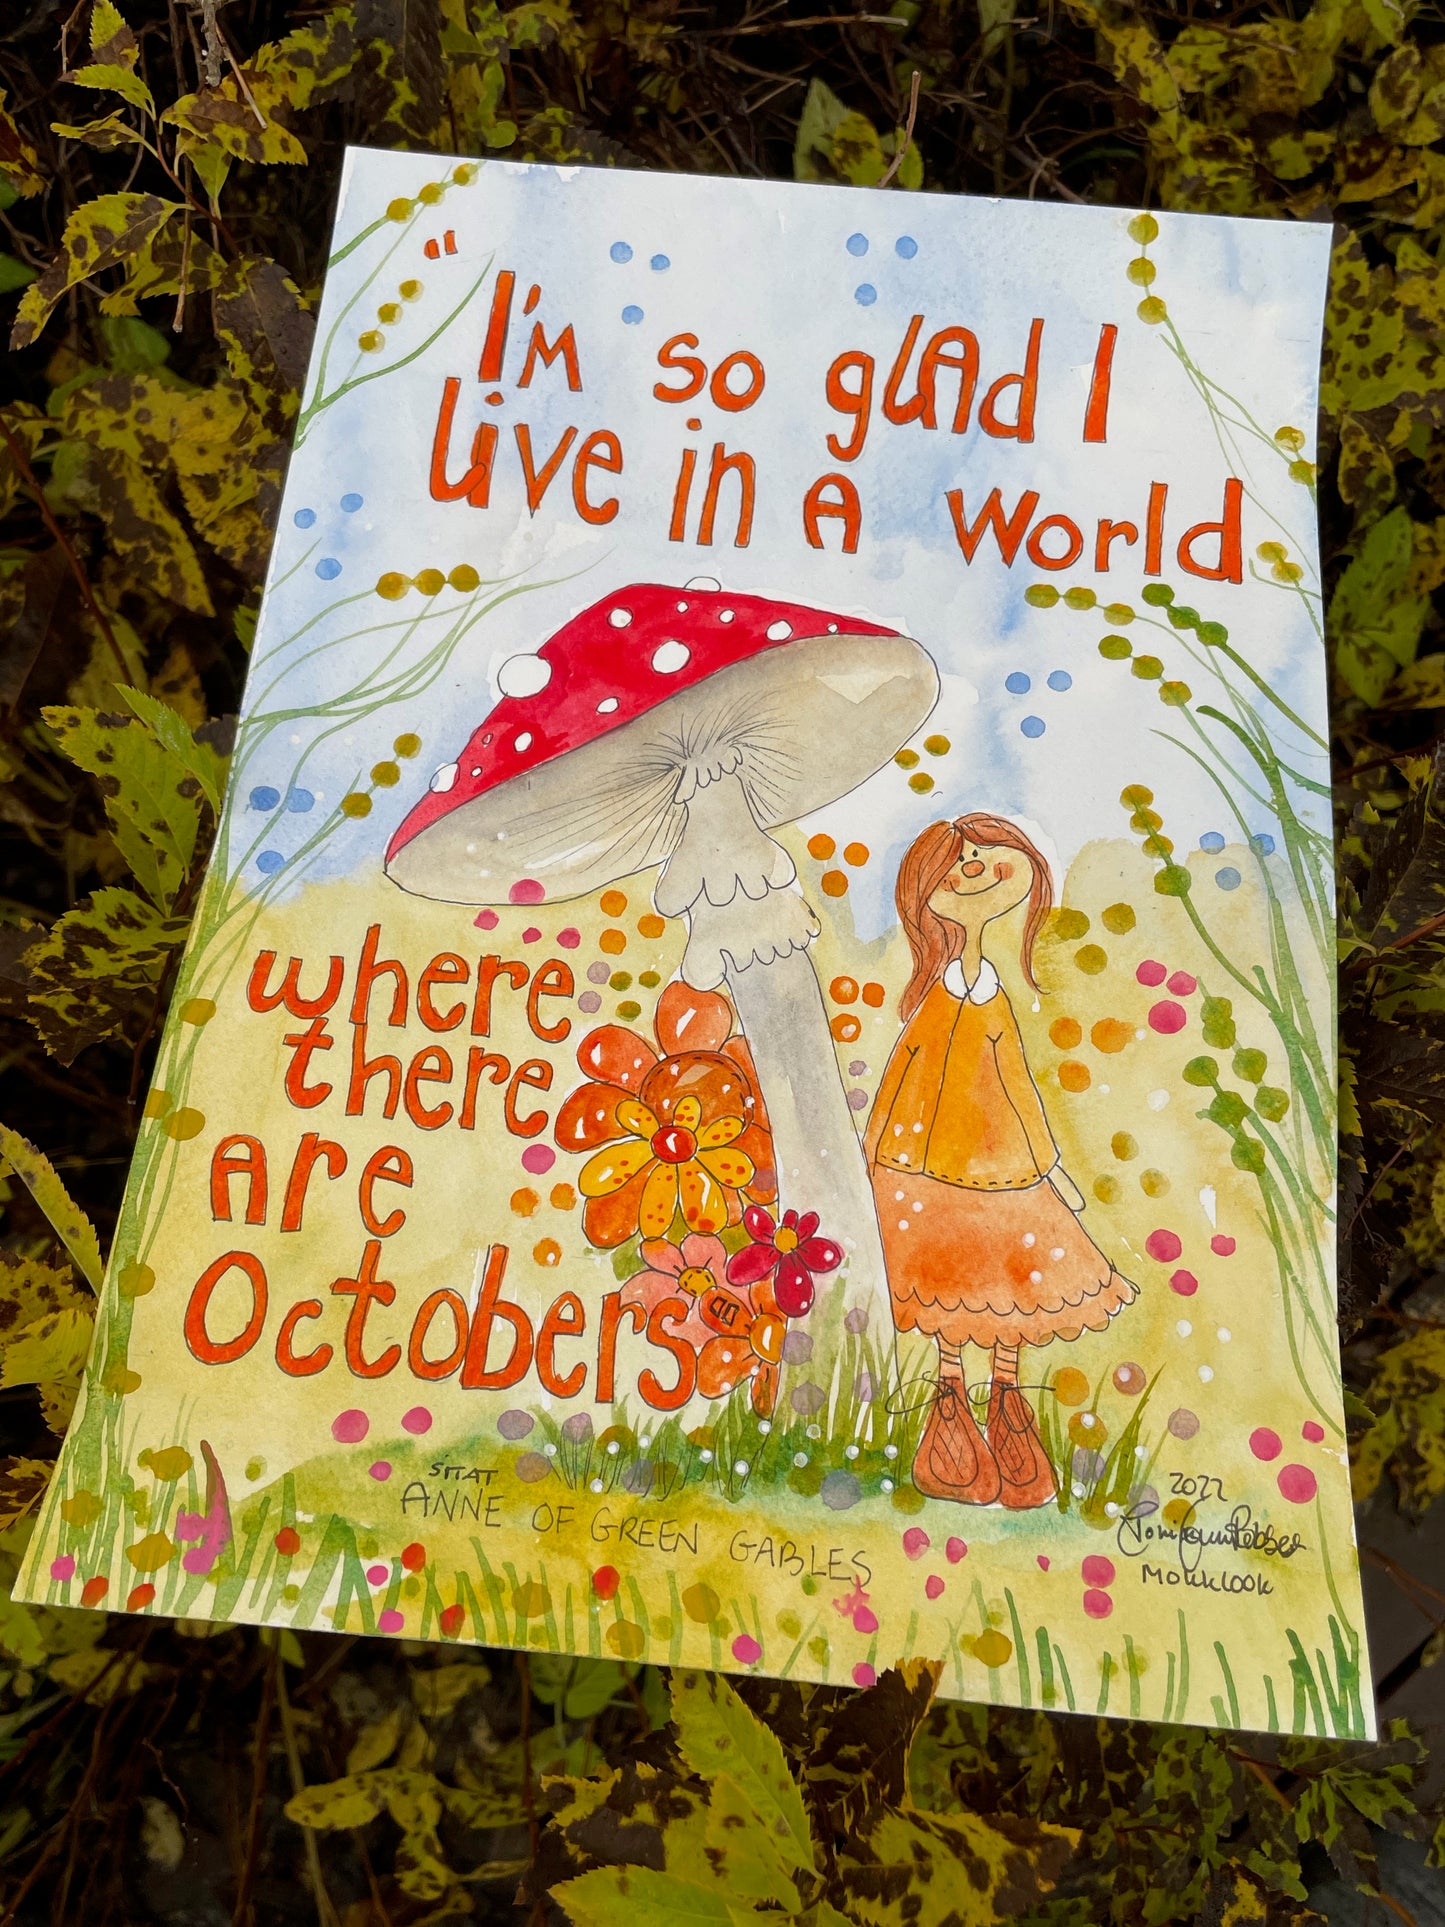 "I'm so glad I live in a world where there are Octobers "